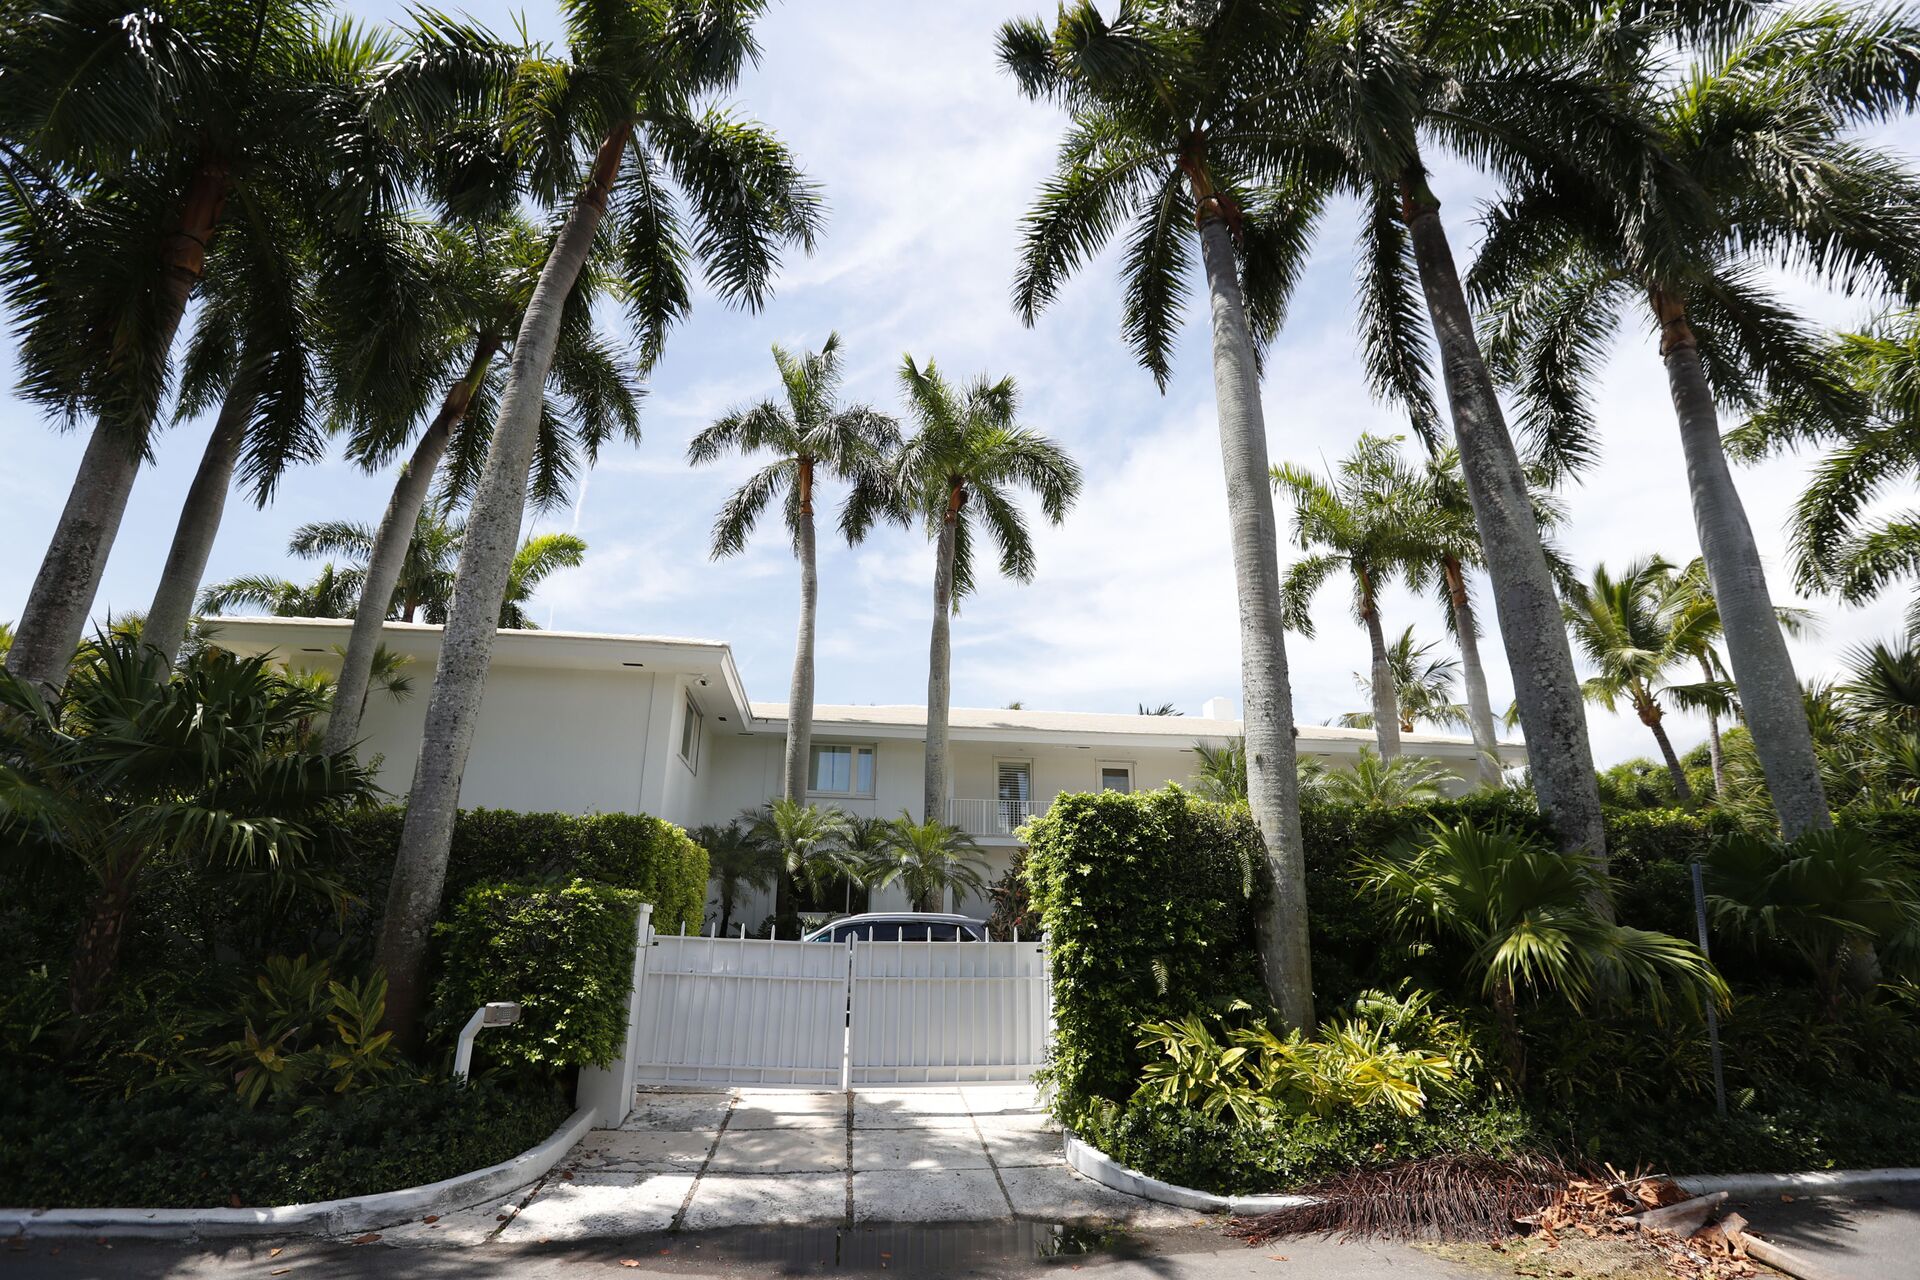 FILE - In this July 10, 2019 file photo, palm trees shade the Florida residence of Jeffrey Epstein in Palm Beach, Fla. The FBI said Thursday July 2, 2020, Ghislaine Maxwell, a British socialite who was accused by many women of helping procure underage sex partners for Epstein, has been arrested in New Hampshire. The court papers said Epstein's abuse of girls occurred at his Manhattan mansion and other residences in Palm Beach, Florida; Sante Fe, New Mexico and London. (AP Photo/Wilfredo Lee, File) - Sputnik International, 1920, 02.12.2021